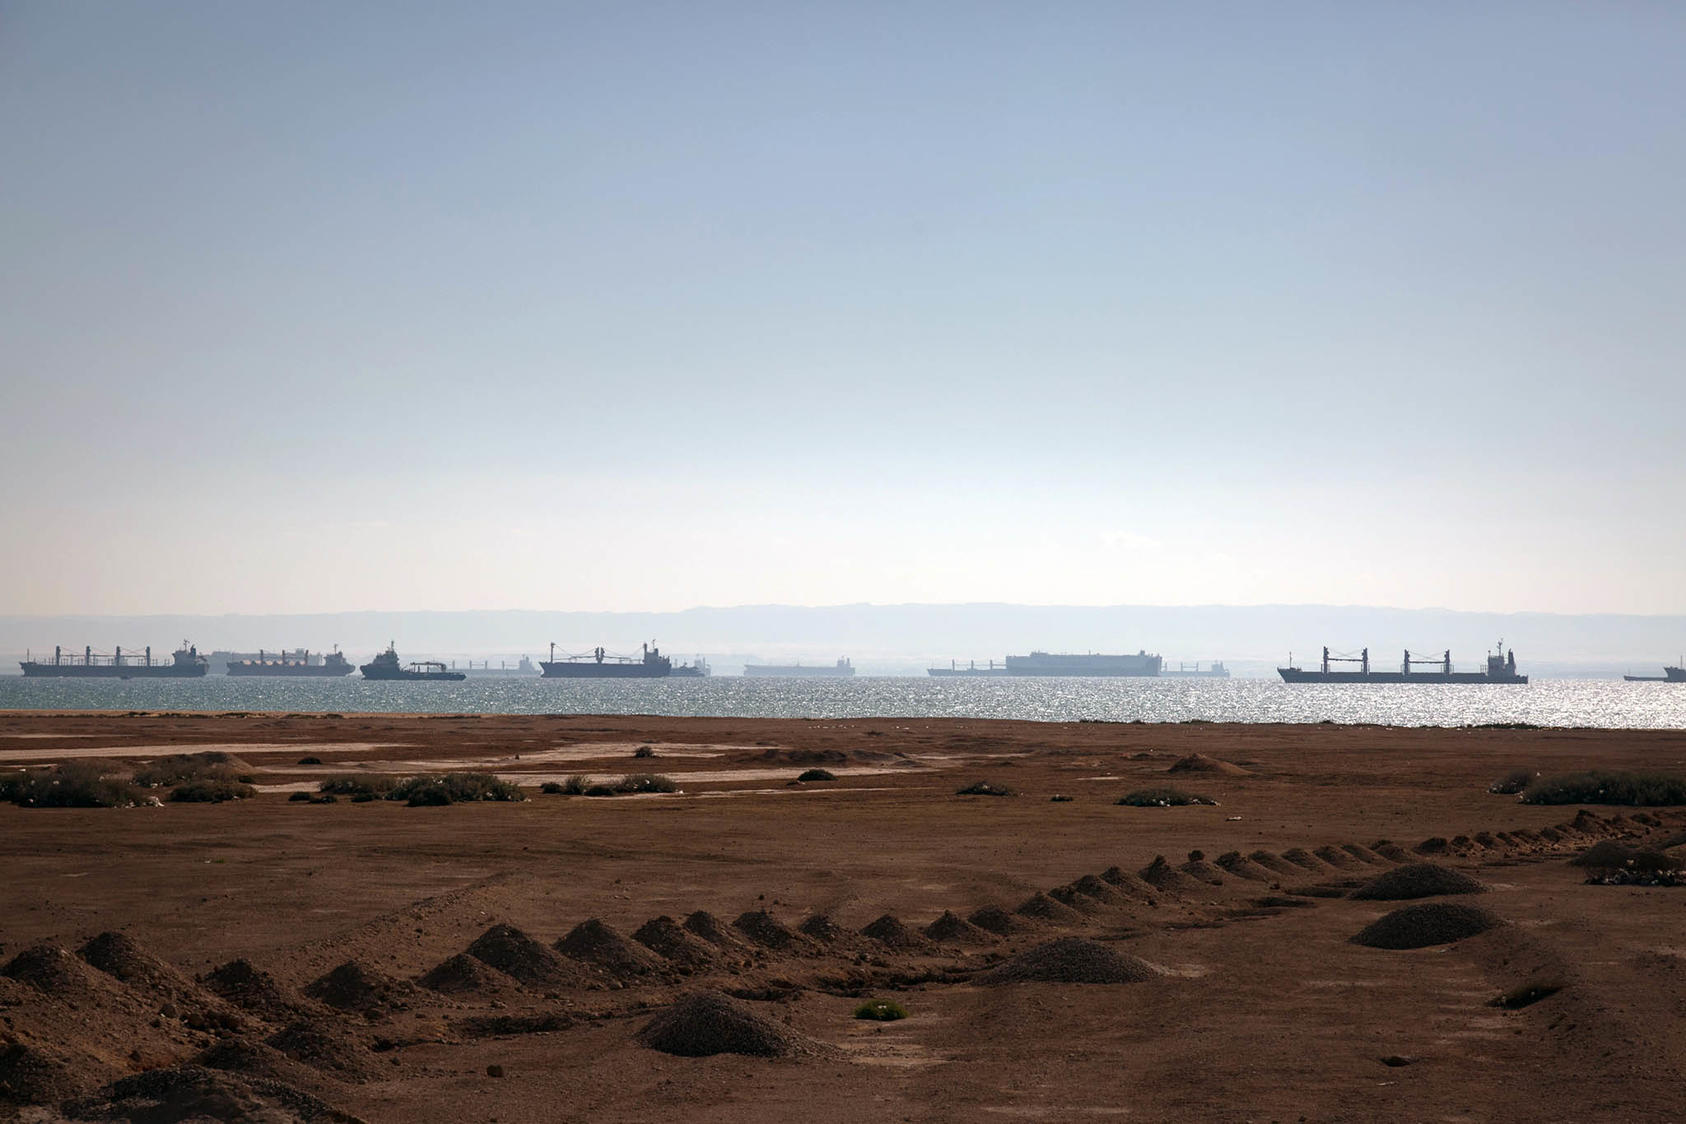 Cargo ships waited in the Red Sea near the opening of the Suez Canal on March 29, 2021. Recent attacks by Houthi rebels on ships in the Red Sea have disrupted global supply chains. (Sima Diab/The New York Times)